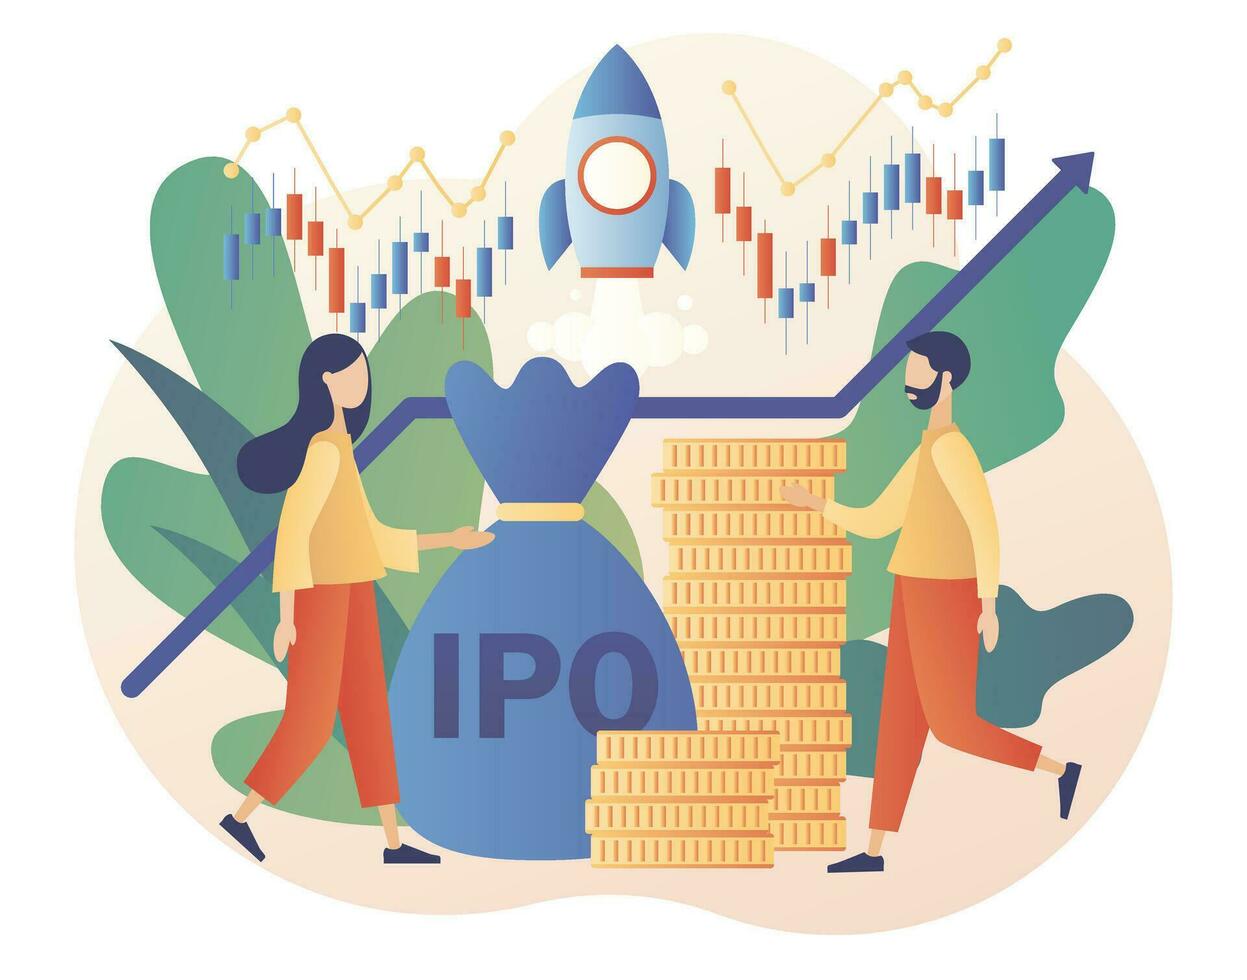 Initial public offering. IPO concept. Investment. Tiny people investors ivest stock market shares. Company growth. Passive income. Modern flat cartoon style. Vector illustration on white background